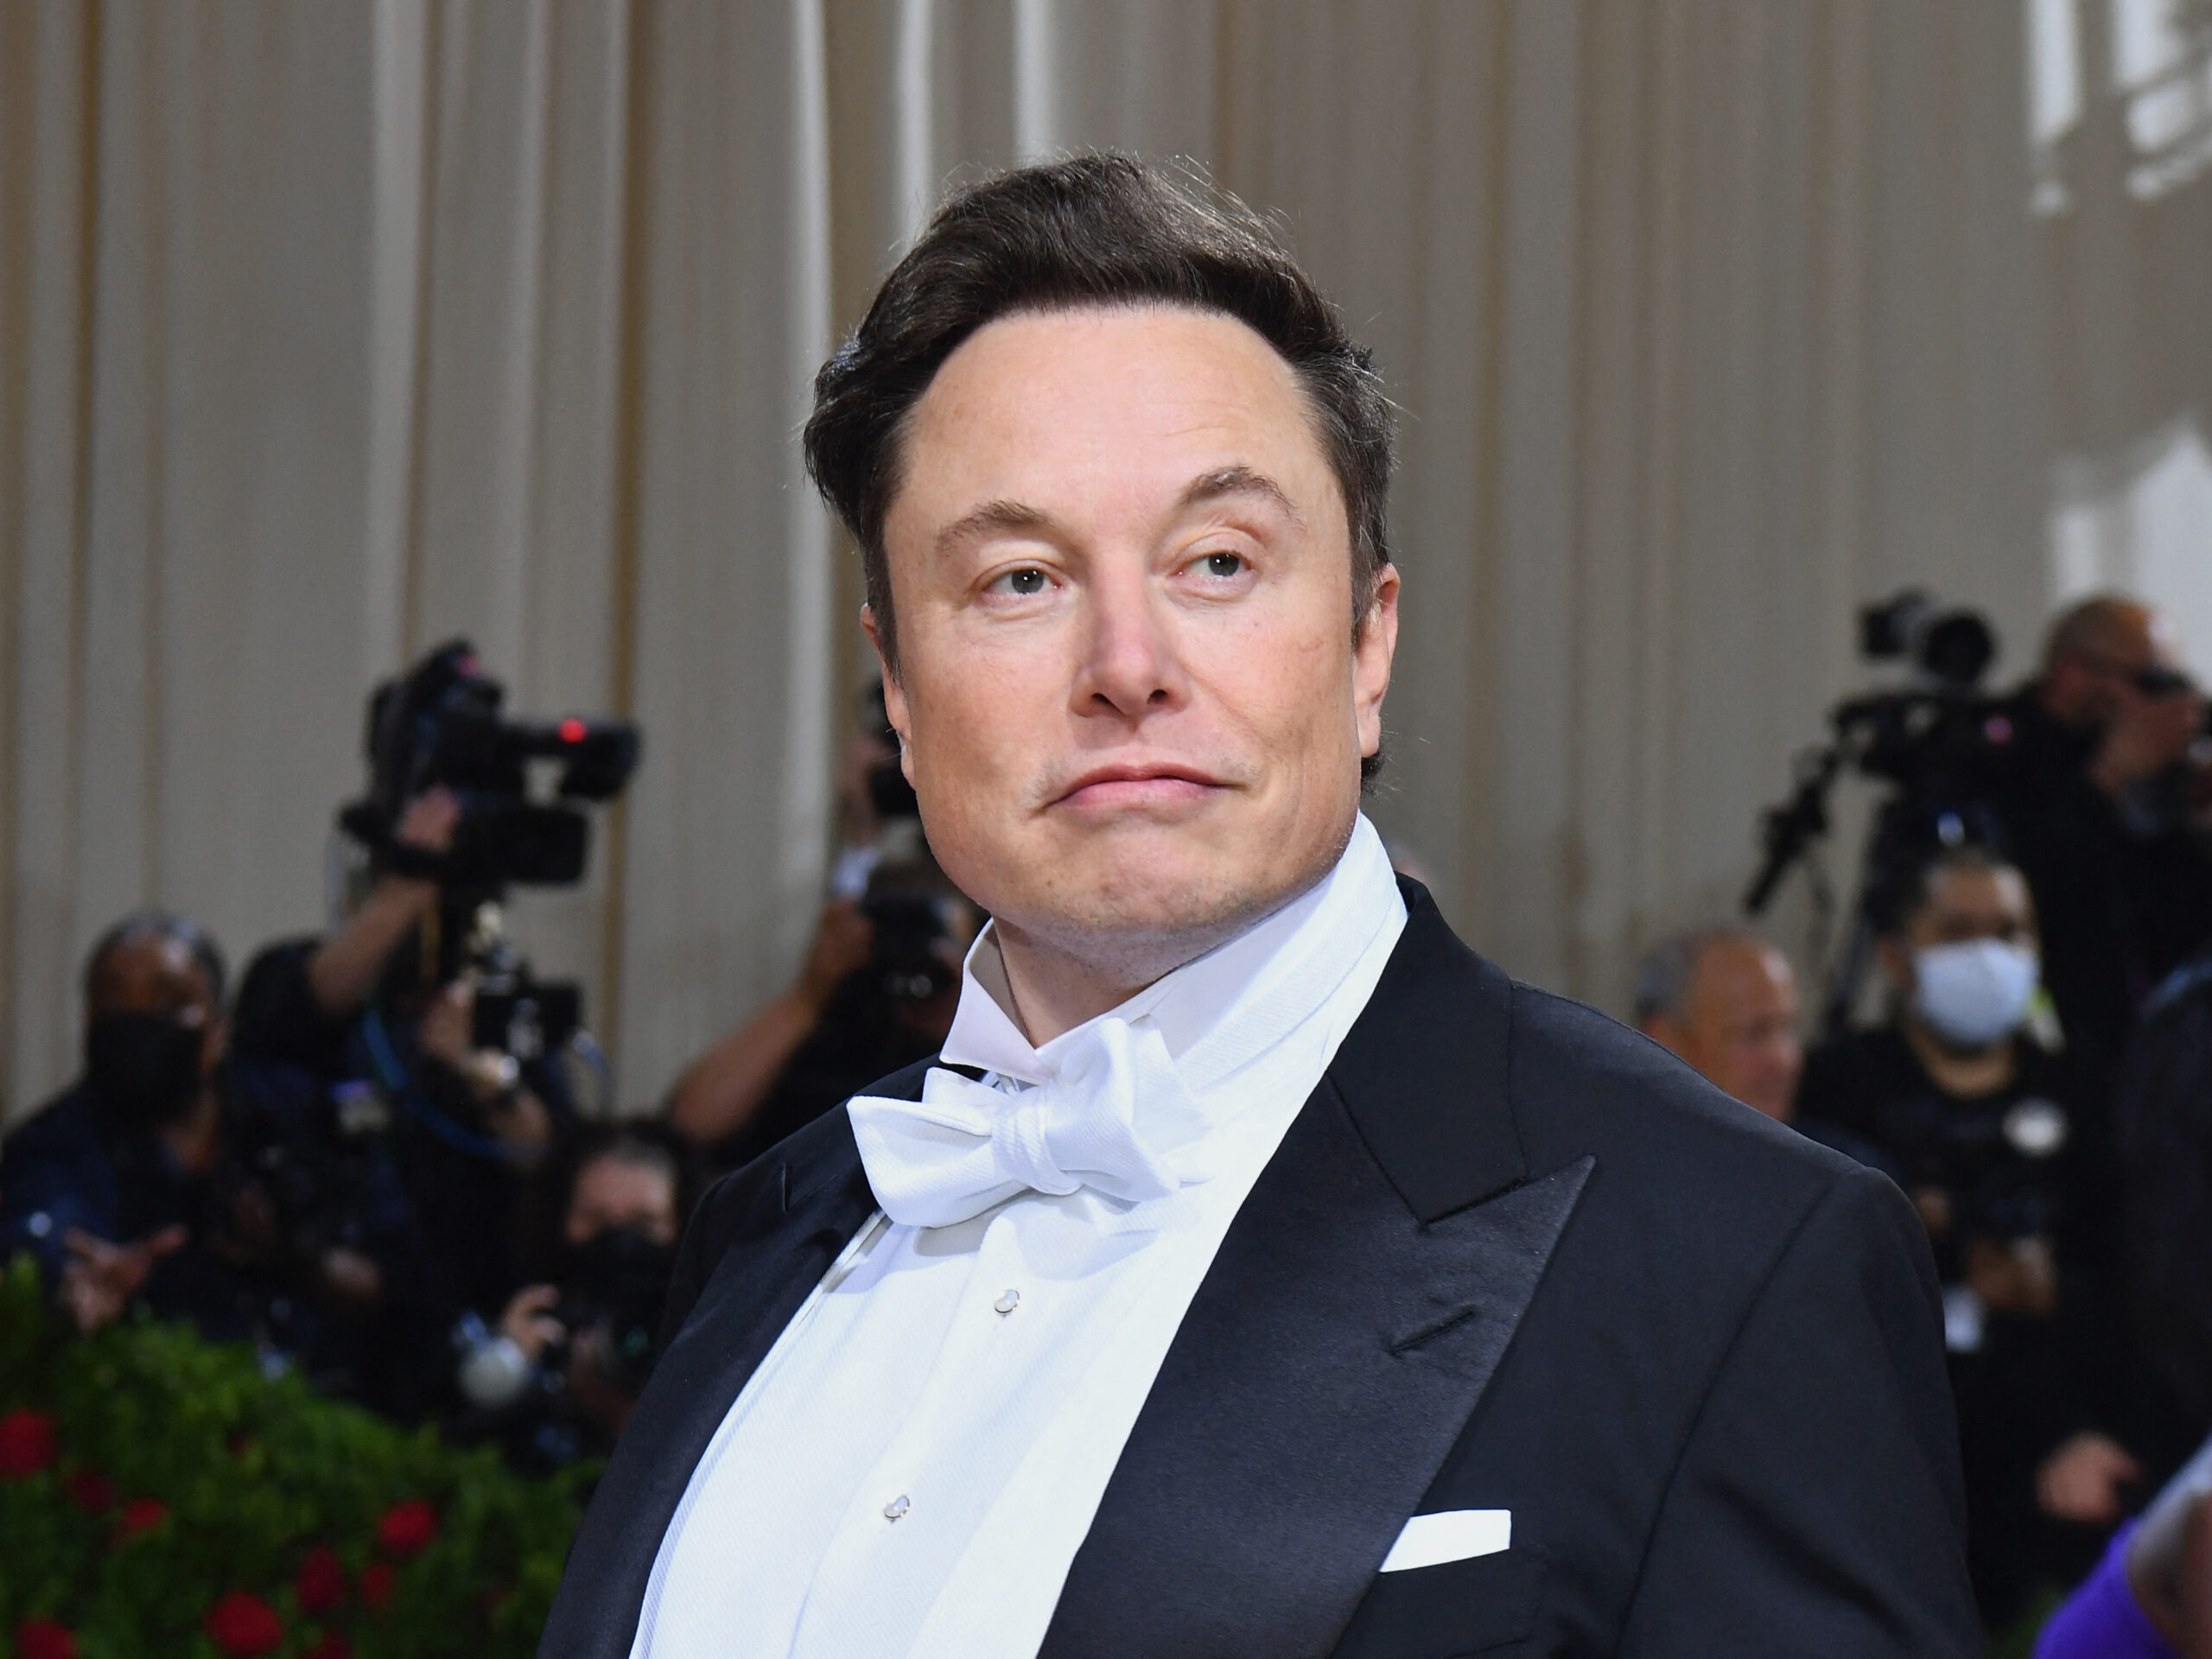 Elon Musk Claims to Buy "The View"